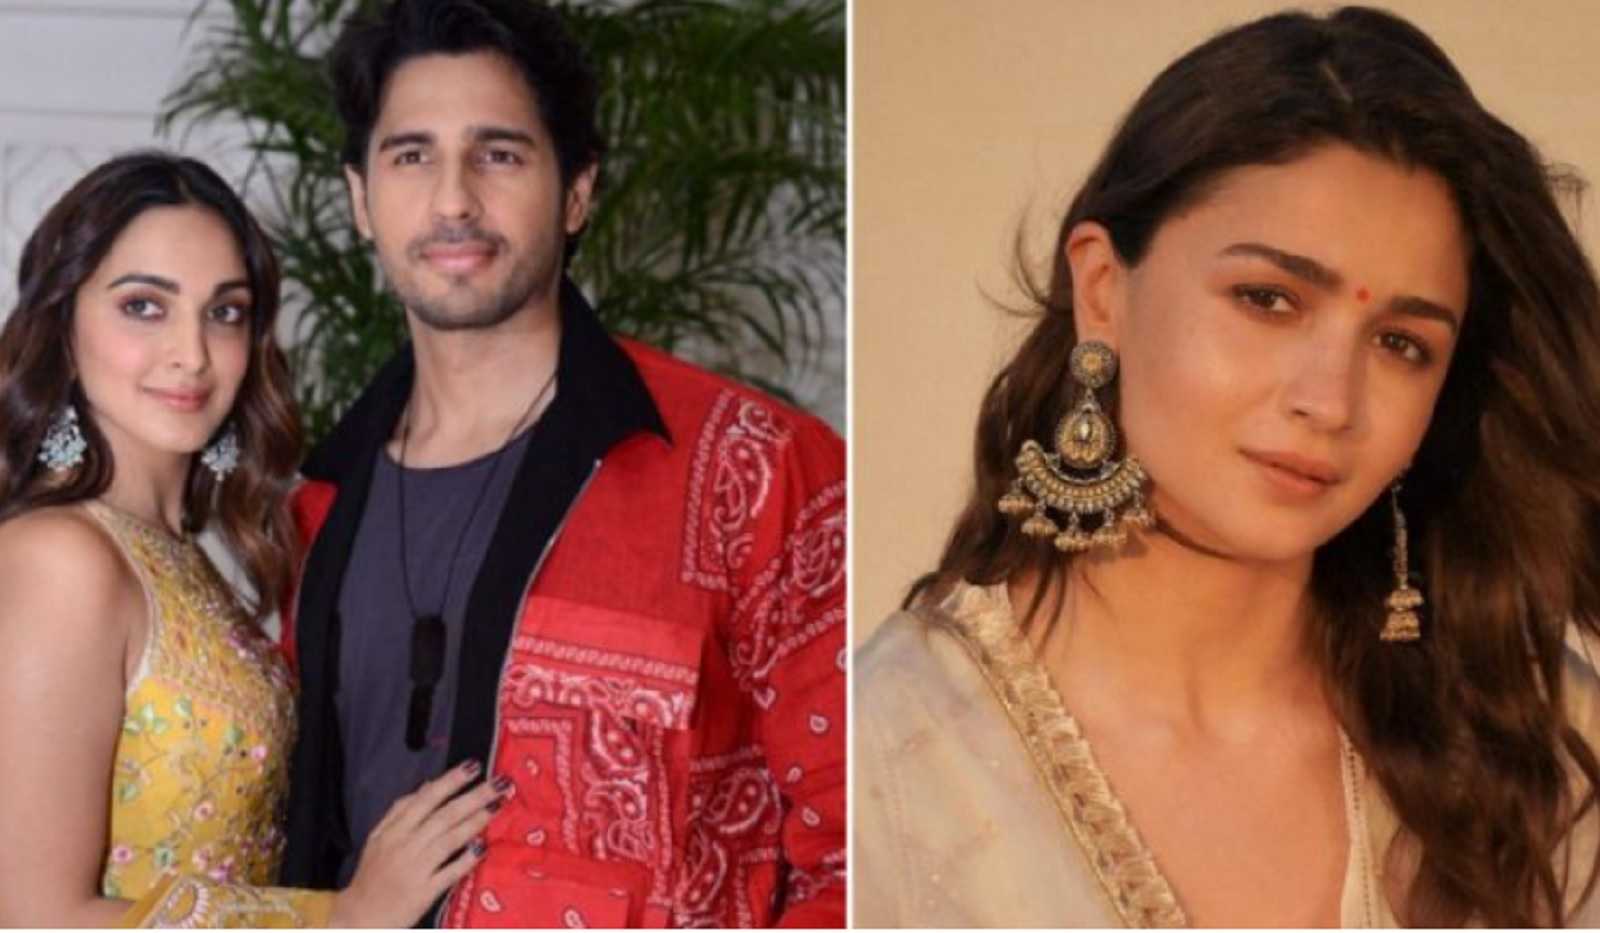 Does Sidharth-Kiara's wedding guests list have former's ex-girlfriend Alia Bhatt's name? here's what we know